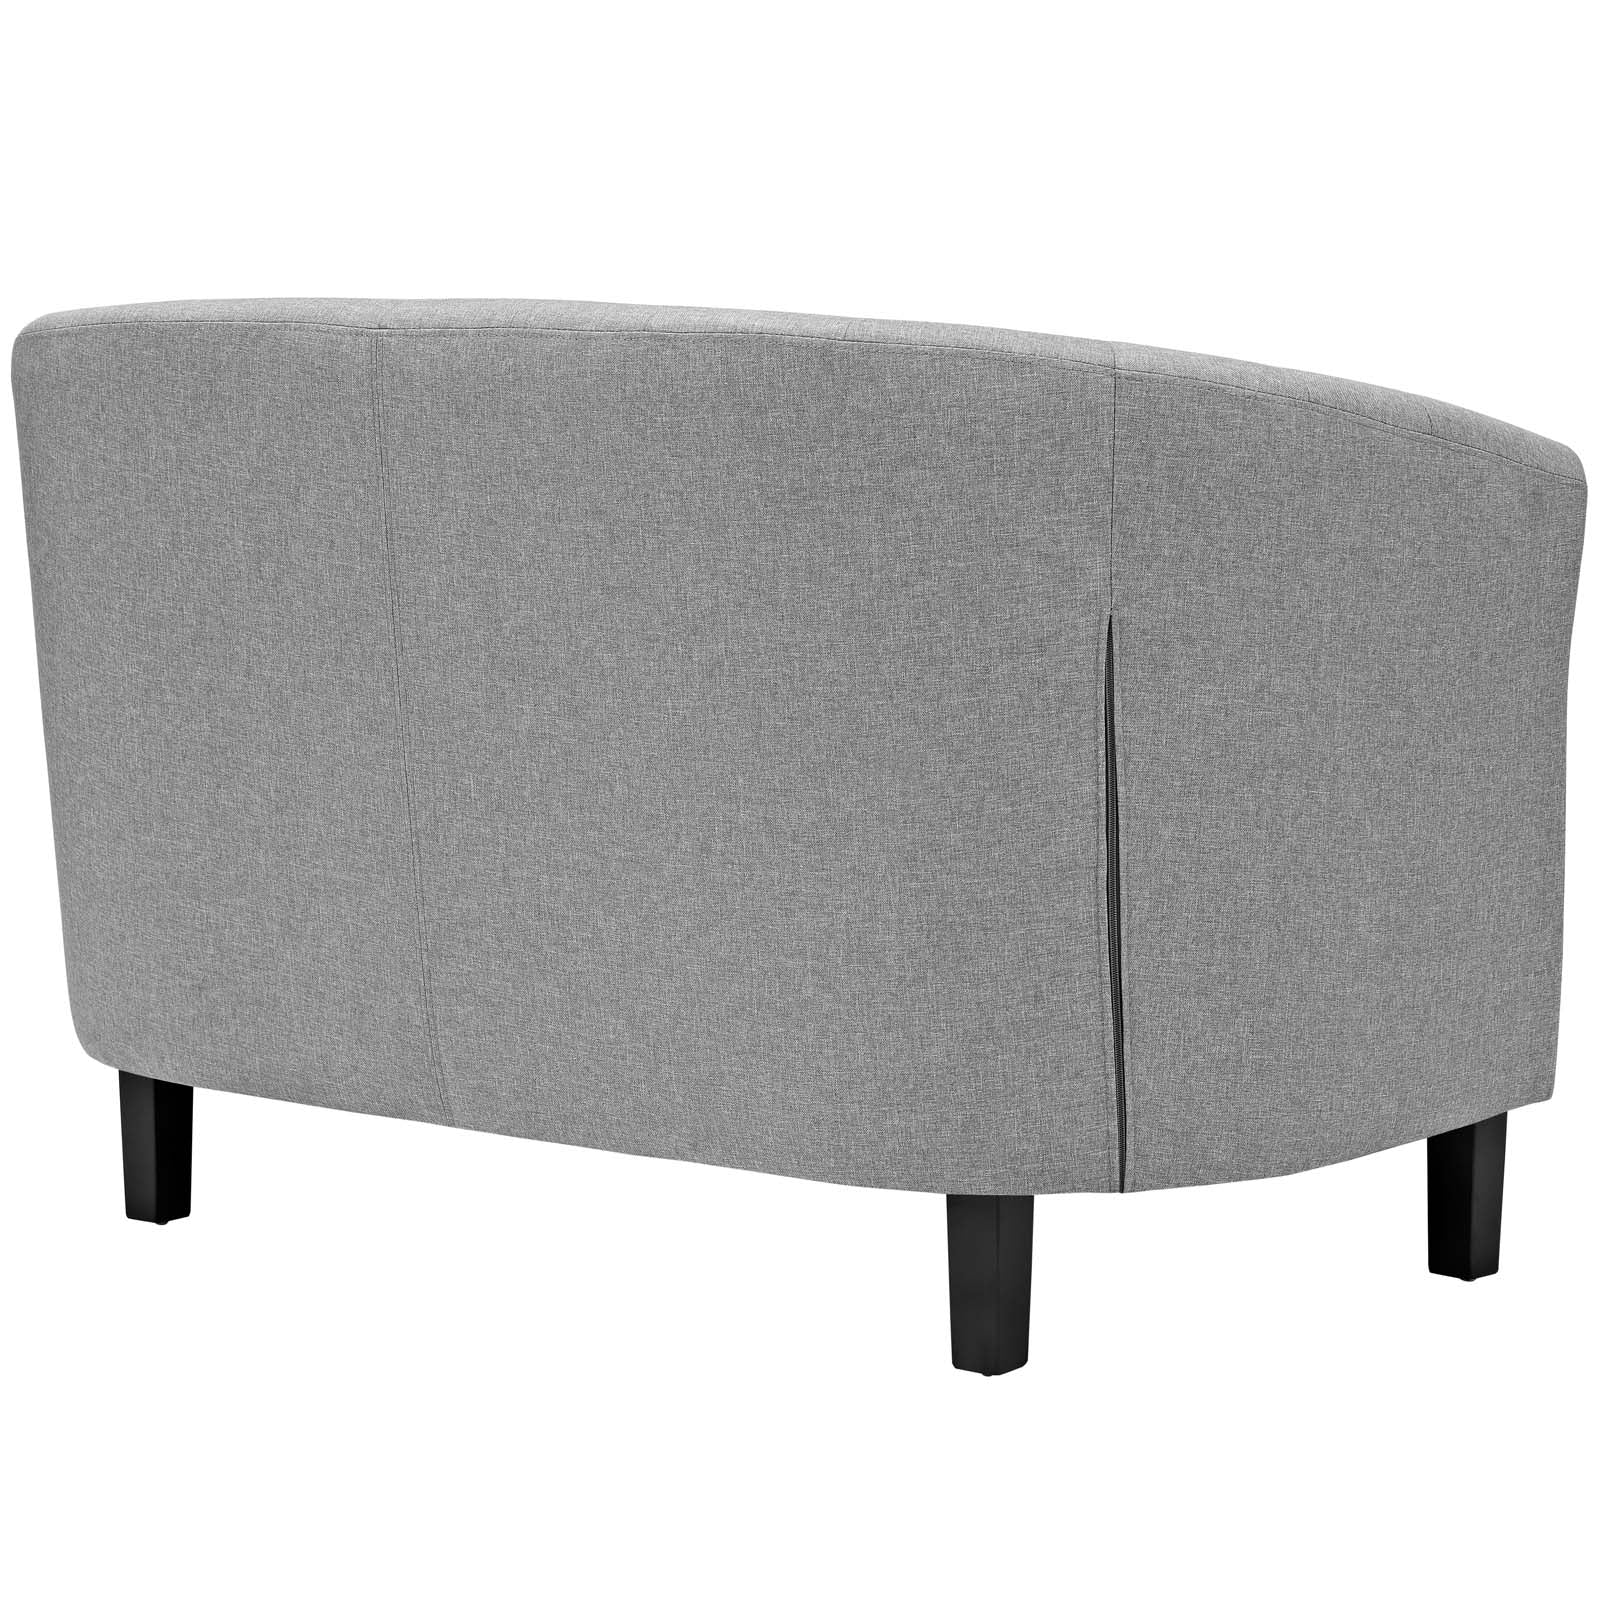 Modway Living Room Sets - Prospect 3 Piece Upholstered Fabric Loveseat and Armchair Set Light Gray